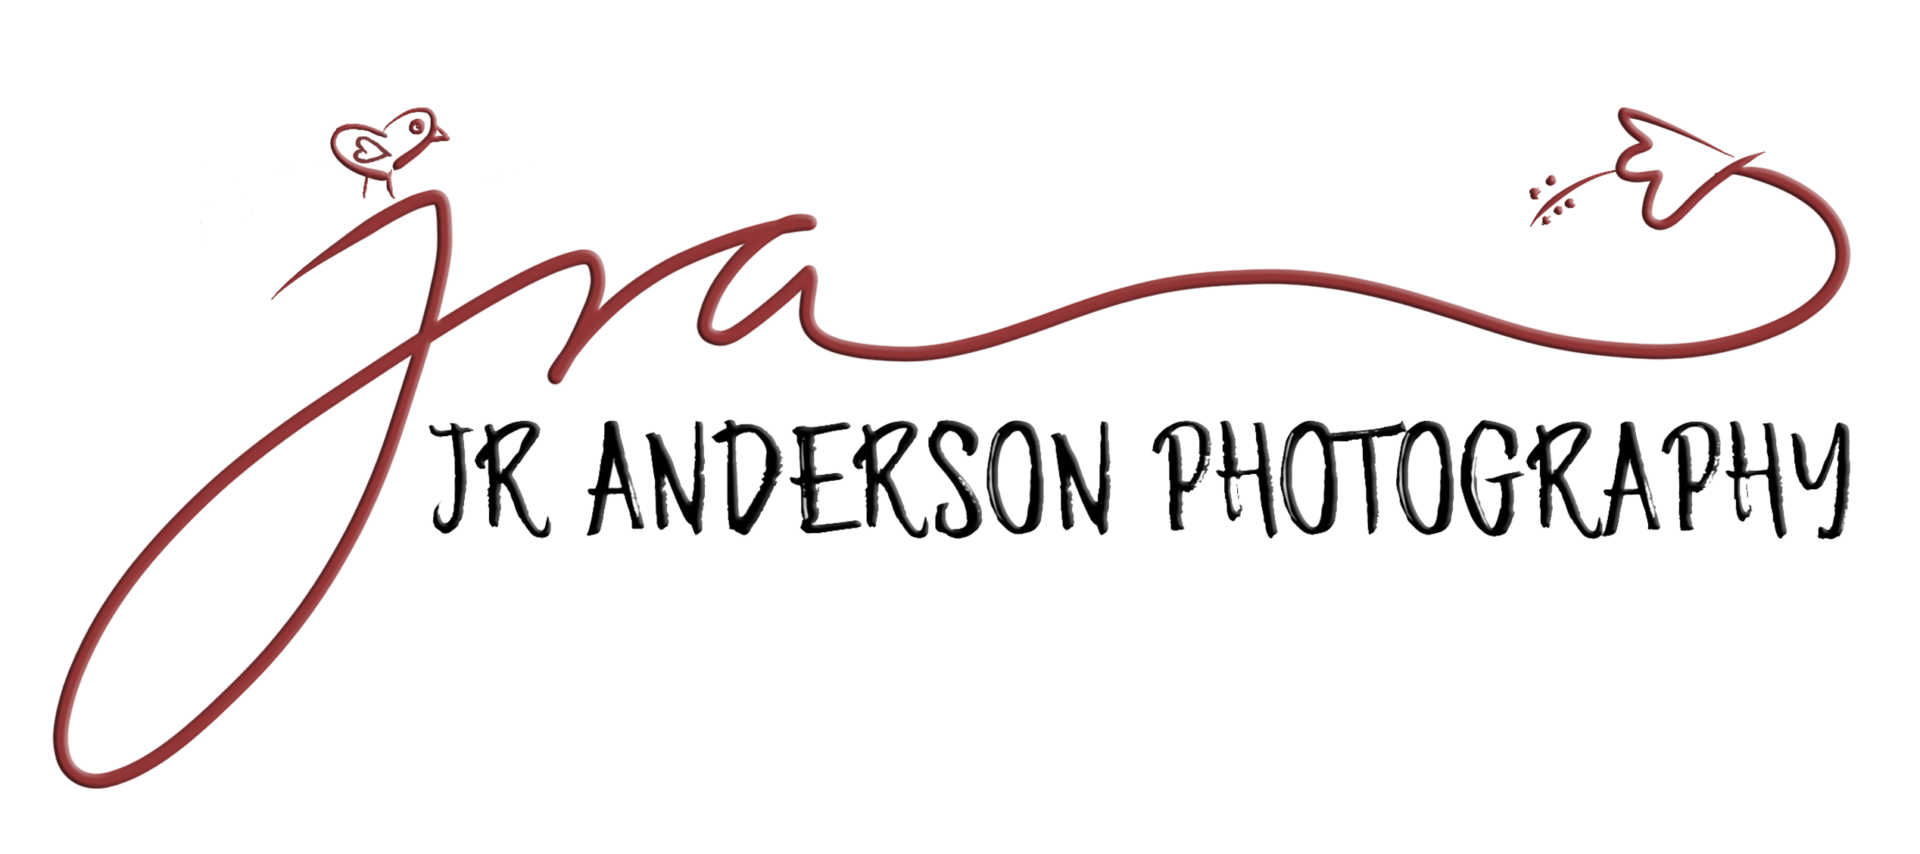 JR Anderson Photography